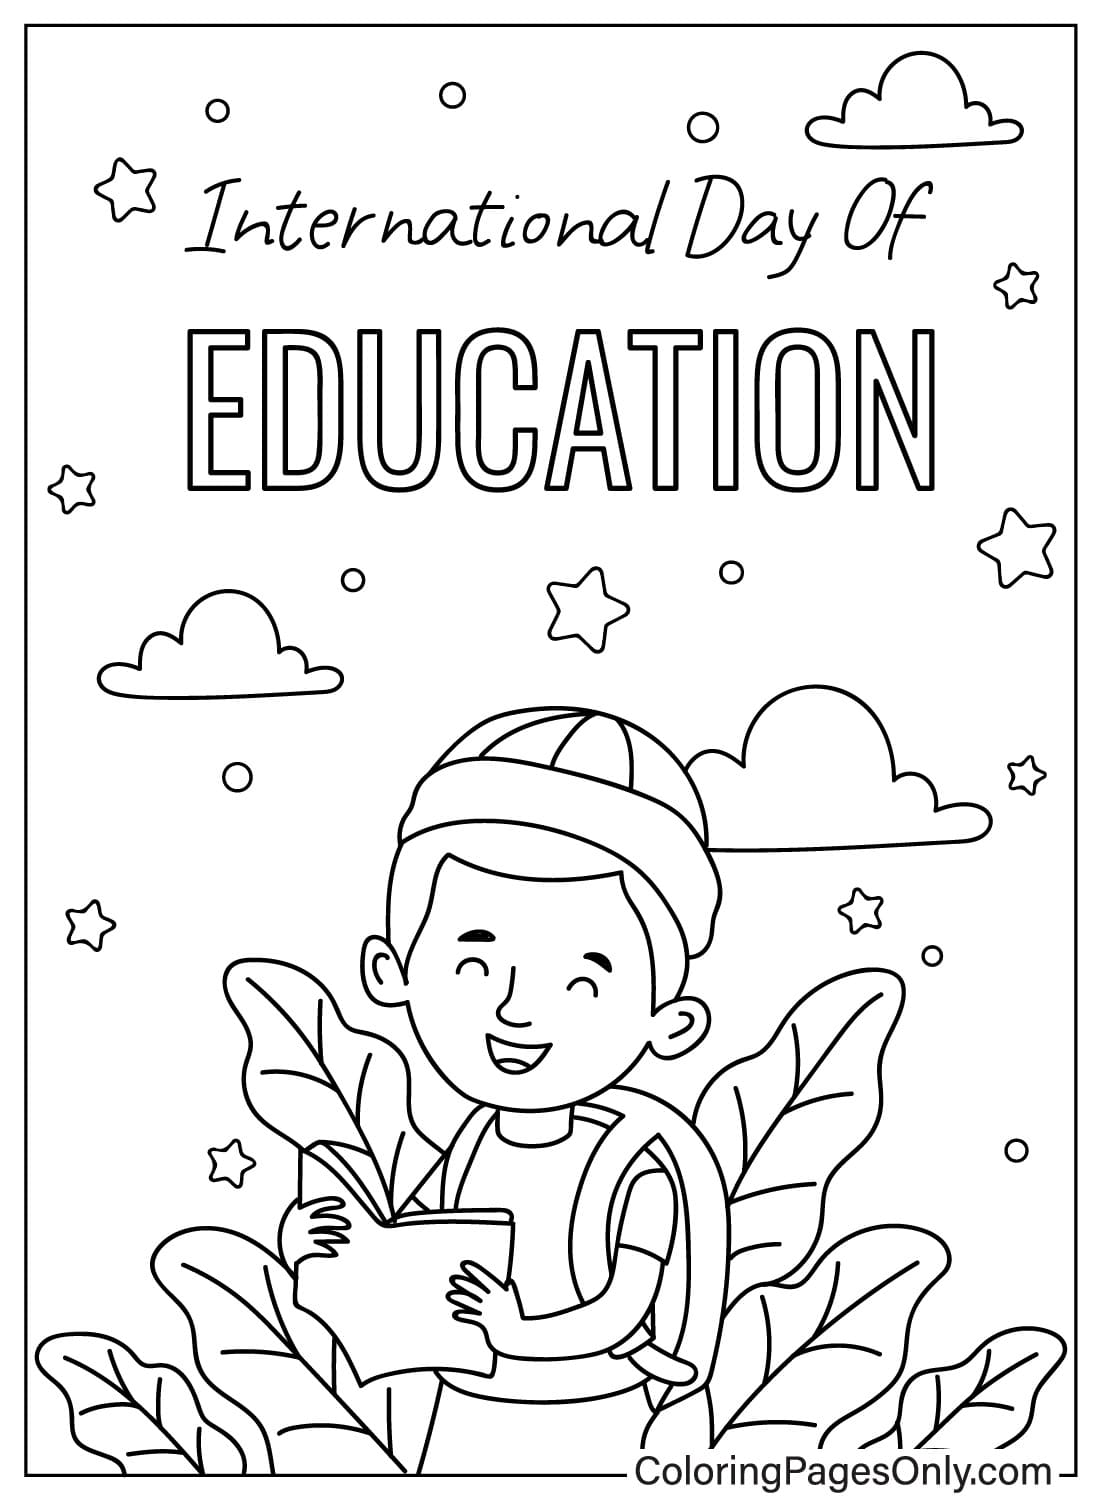 International Day of Education Coloring Page from International Day of Education